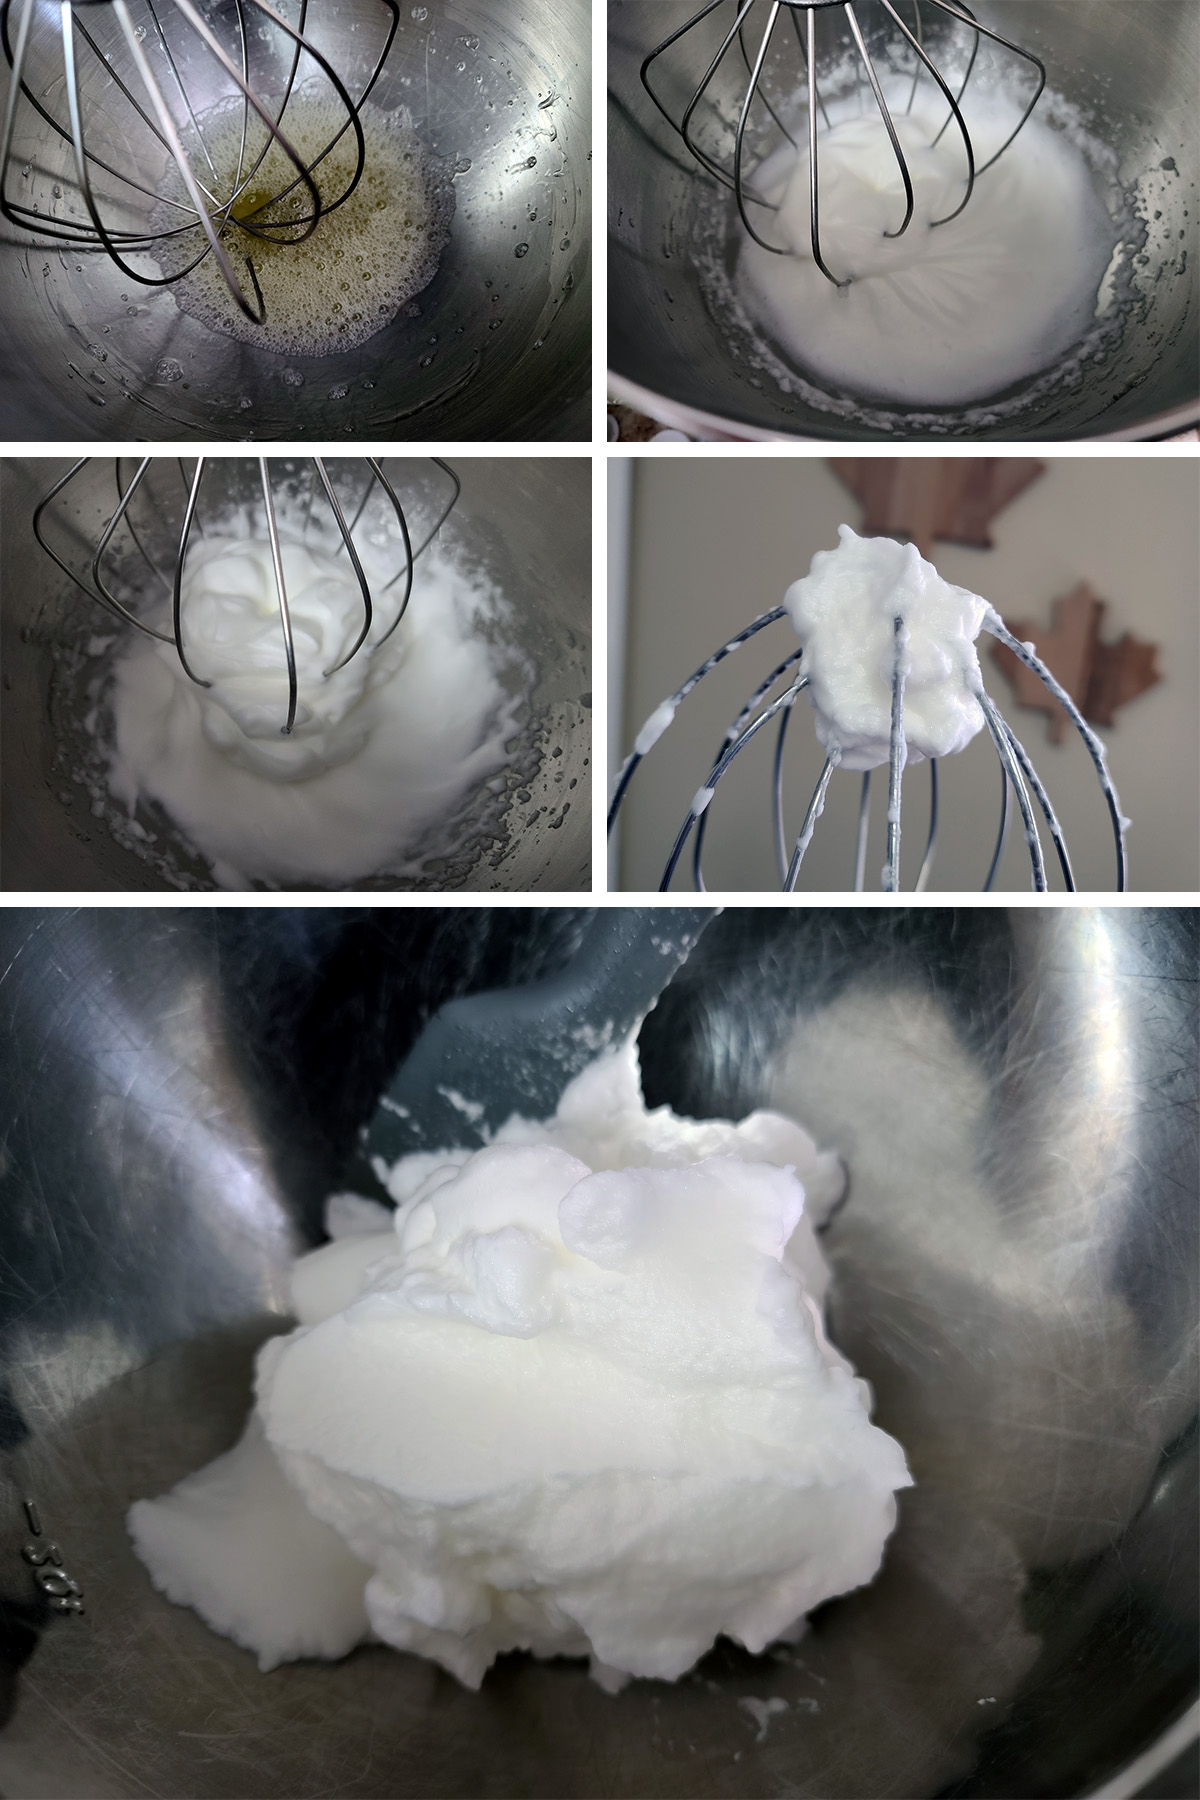 A 5 part image showing the egg whites being whipped until stiff peaks form.